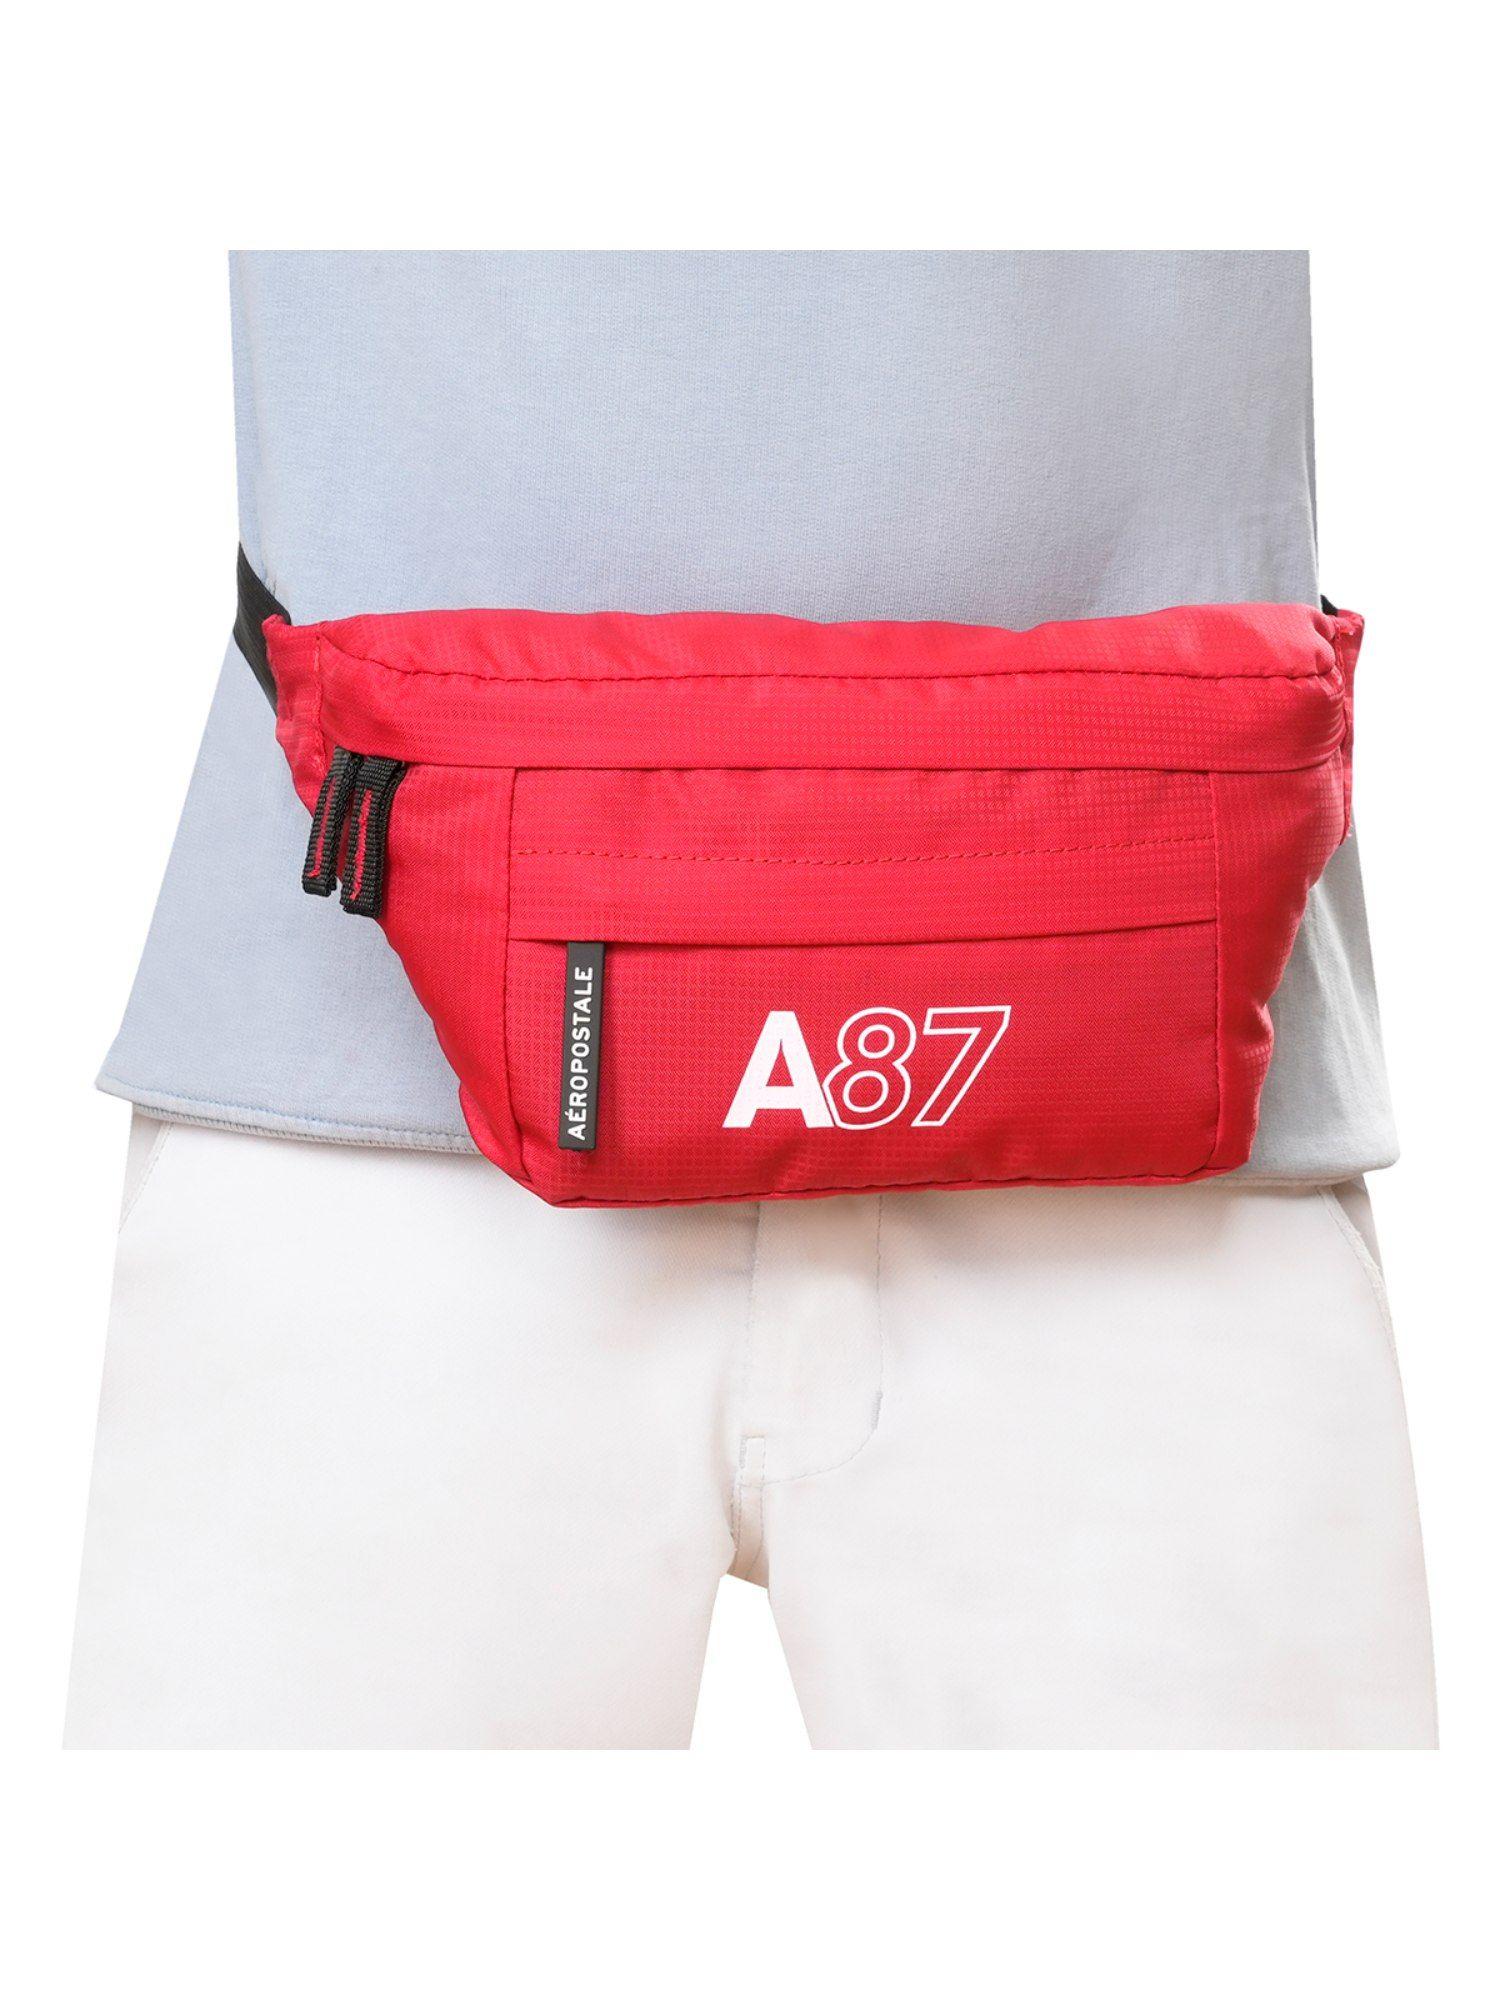 oliver unisex polyester waist bags - red